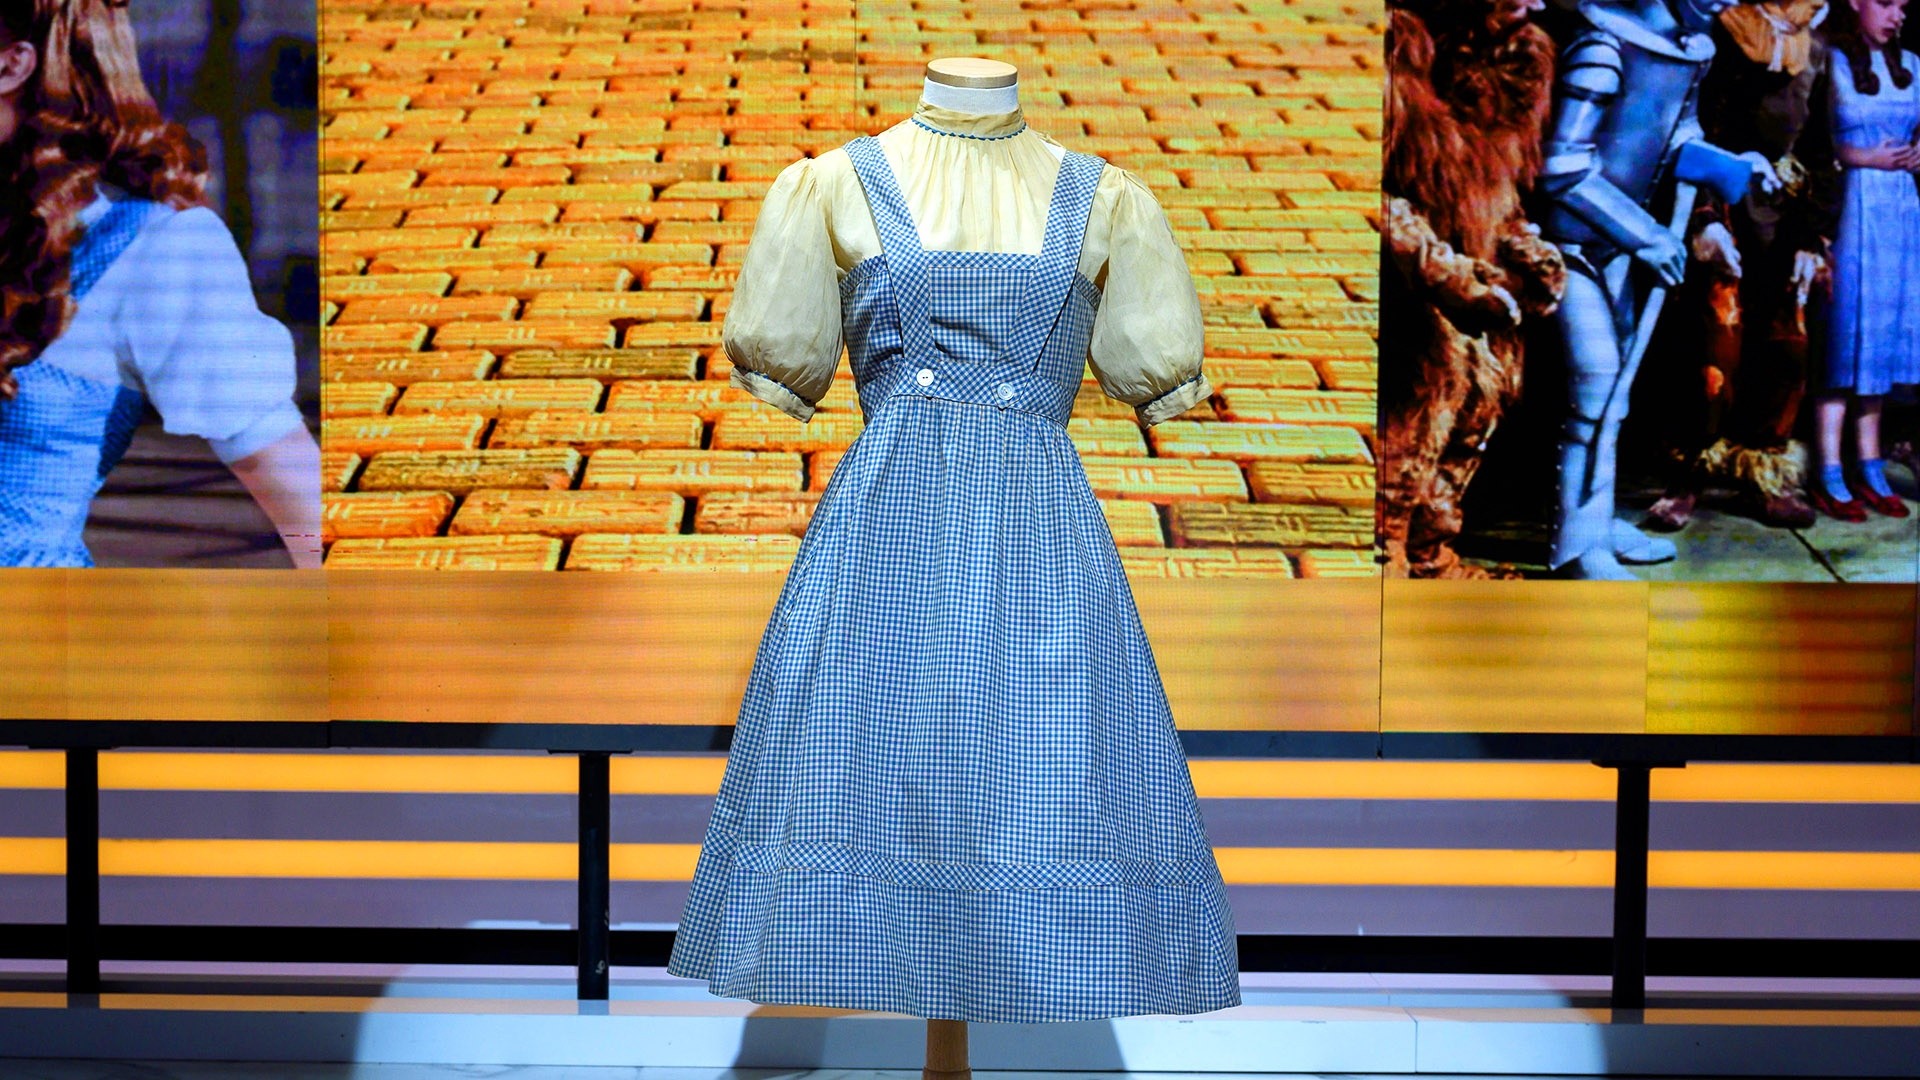 Judge Halts Auction of 'Wizard of Oz' Dress Amid Ownership Battle